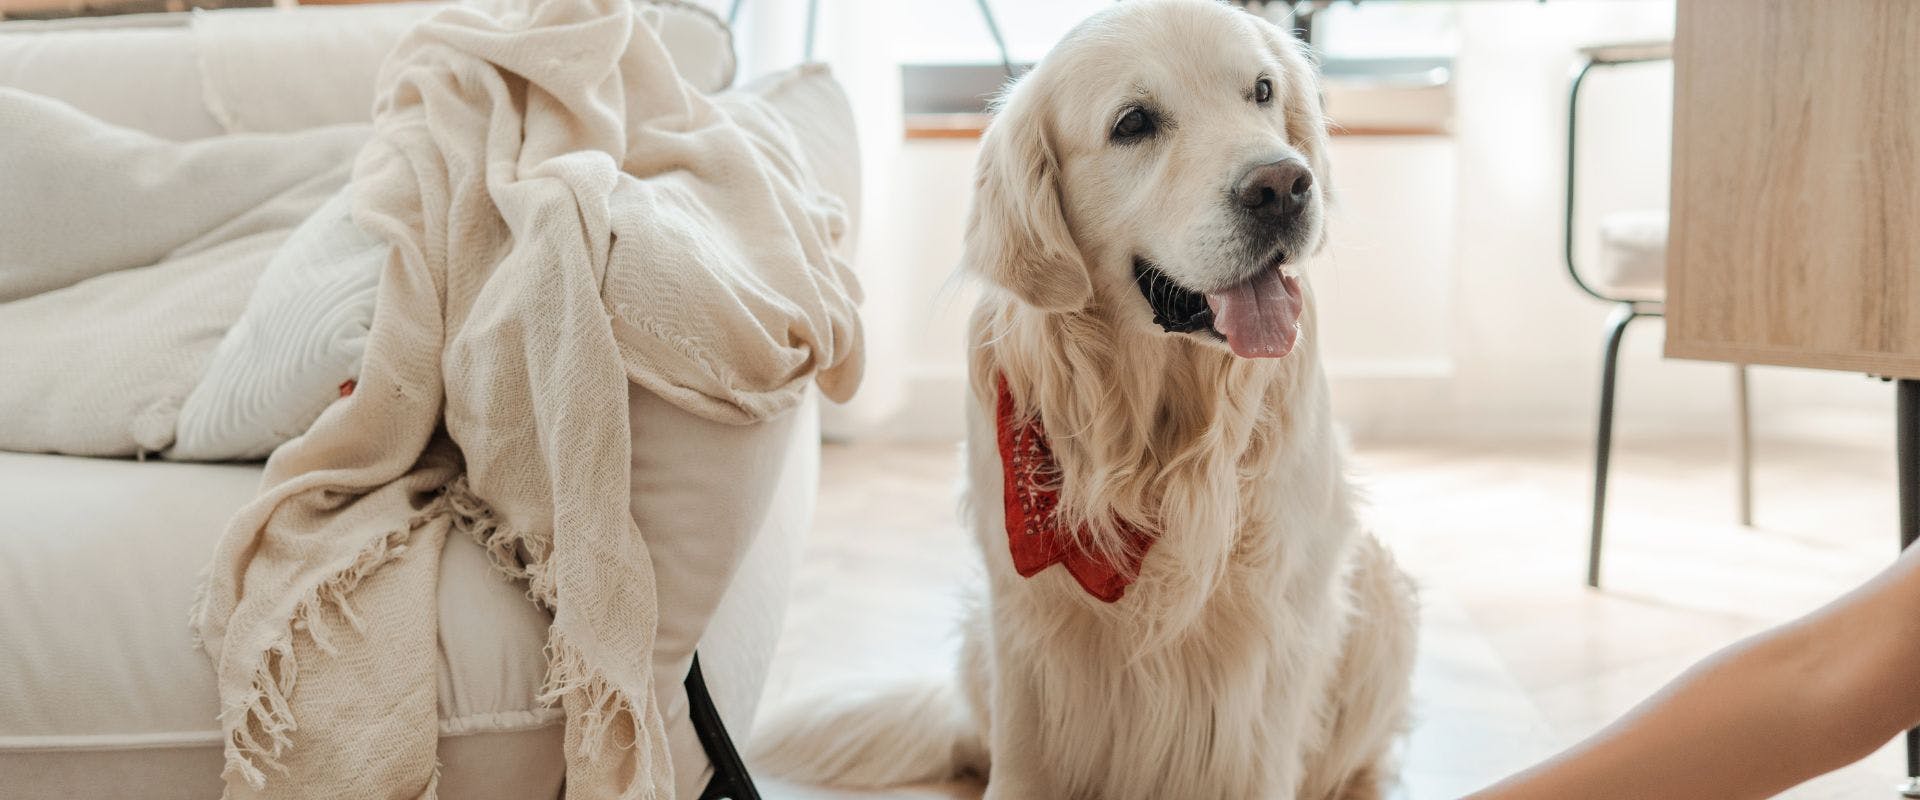 Golden Retriever waiting to be fed in living room